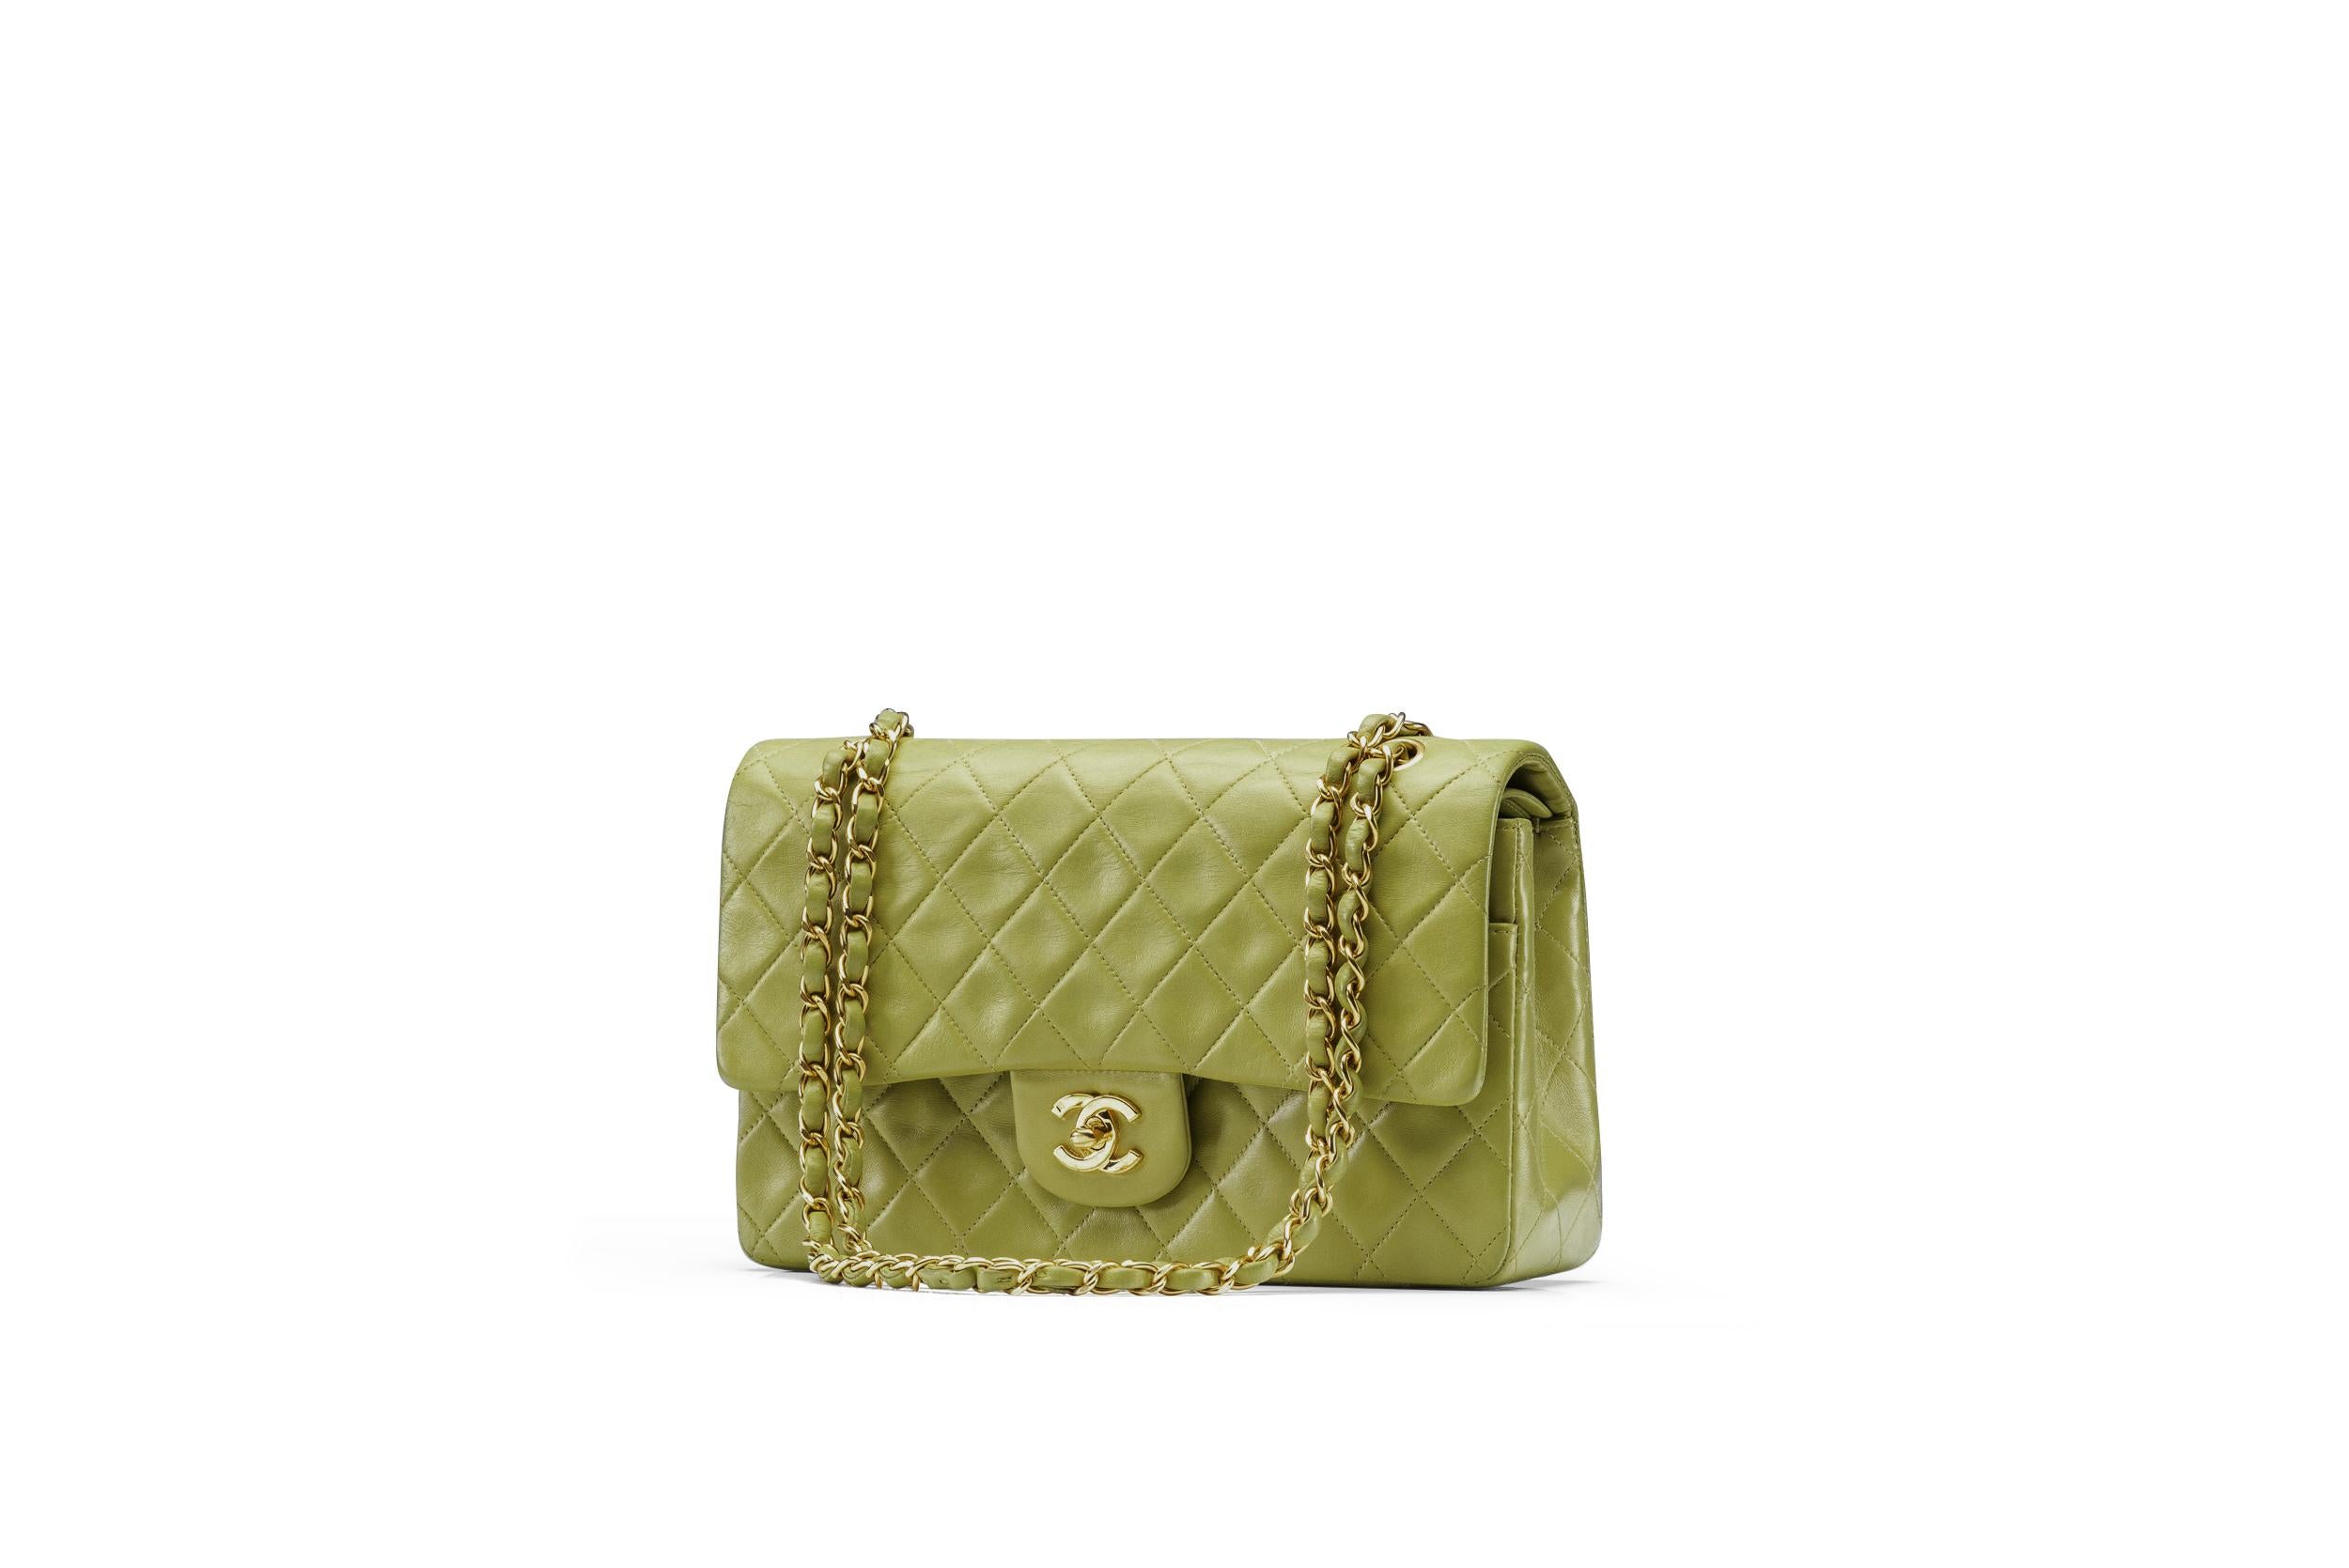 Brown Chanel Classic Double Flap Bag Medium Lime Gold Hardware RARE Vintage